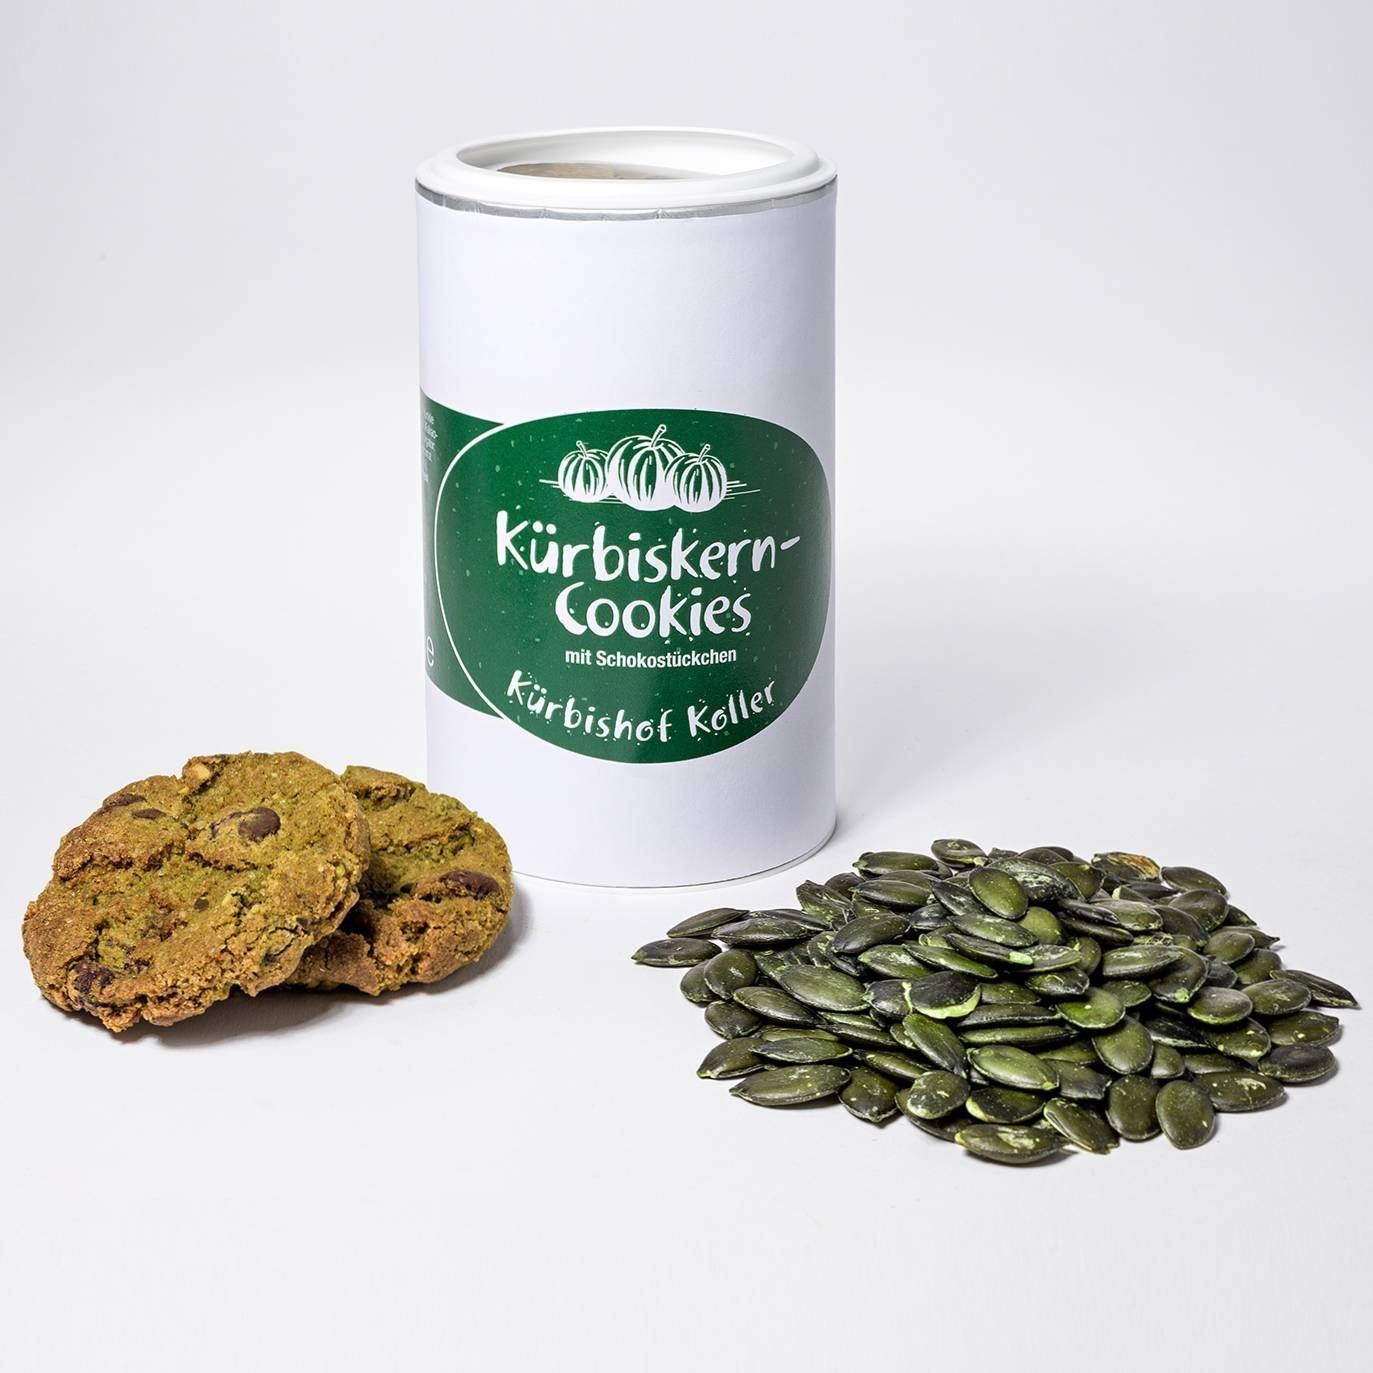 Pumpkin Seed Cookies with Chocolate Chips in Ukraine